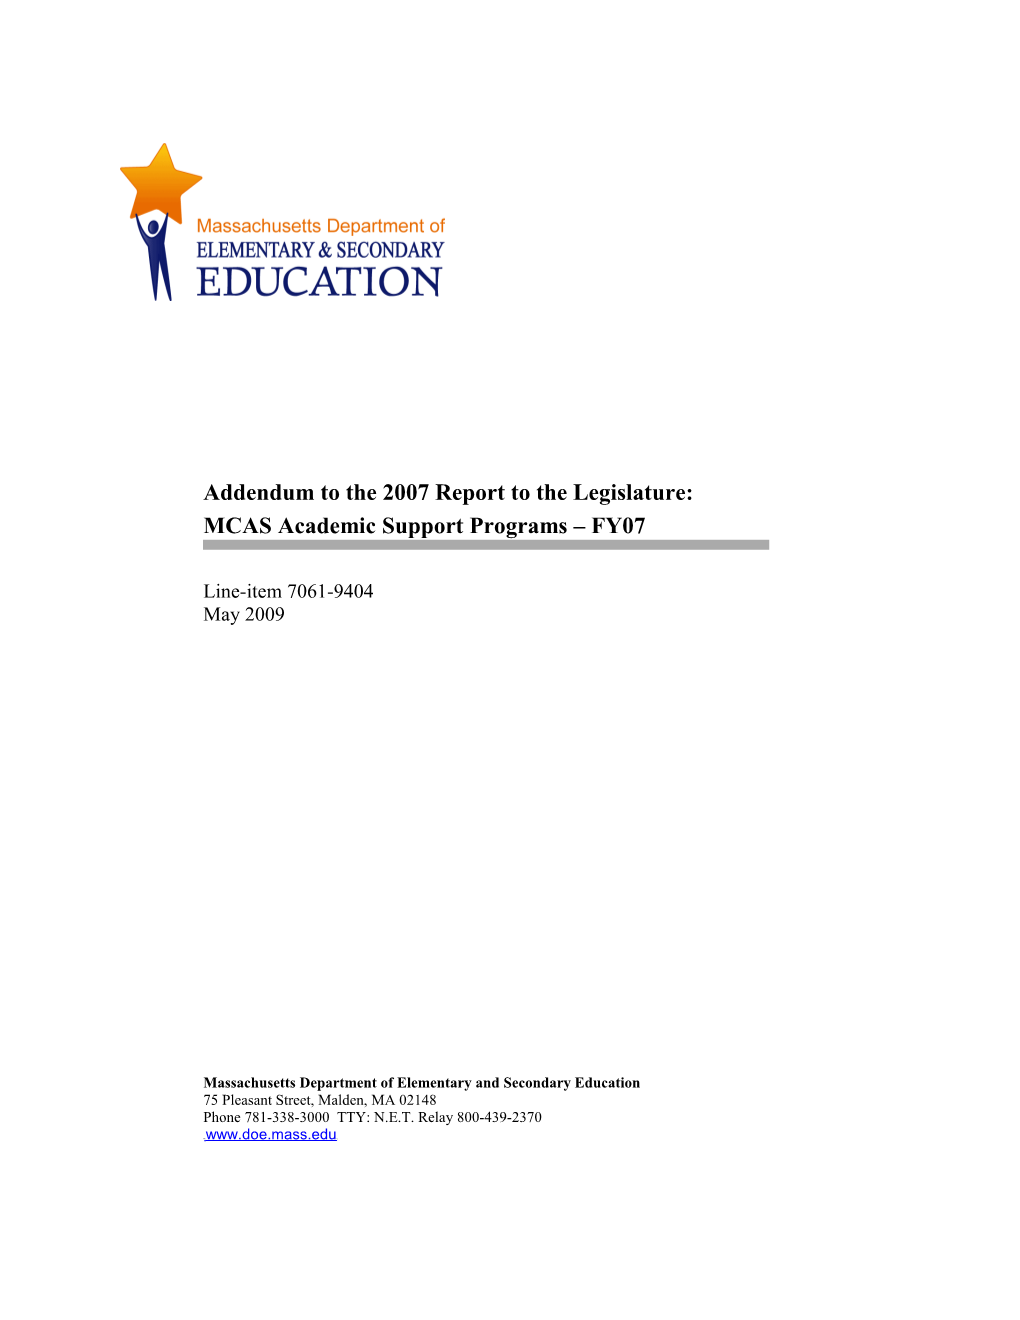 Addendum to the 2007 Report to the Legislature: MCAS Academic Support Programs FY07